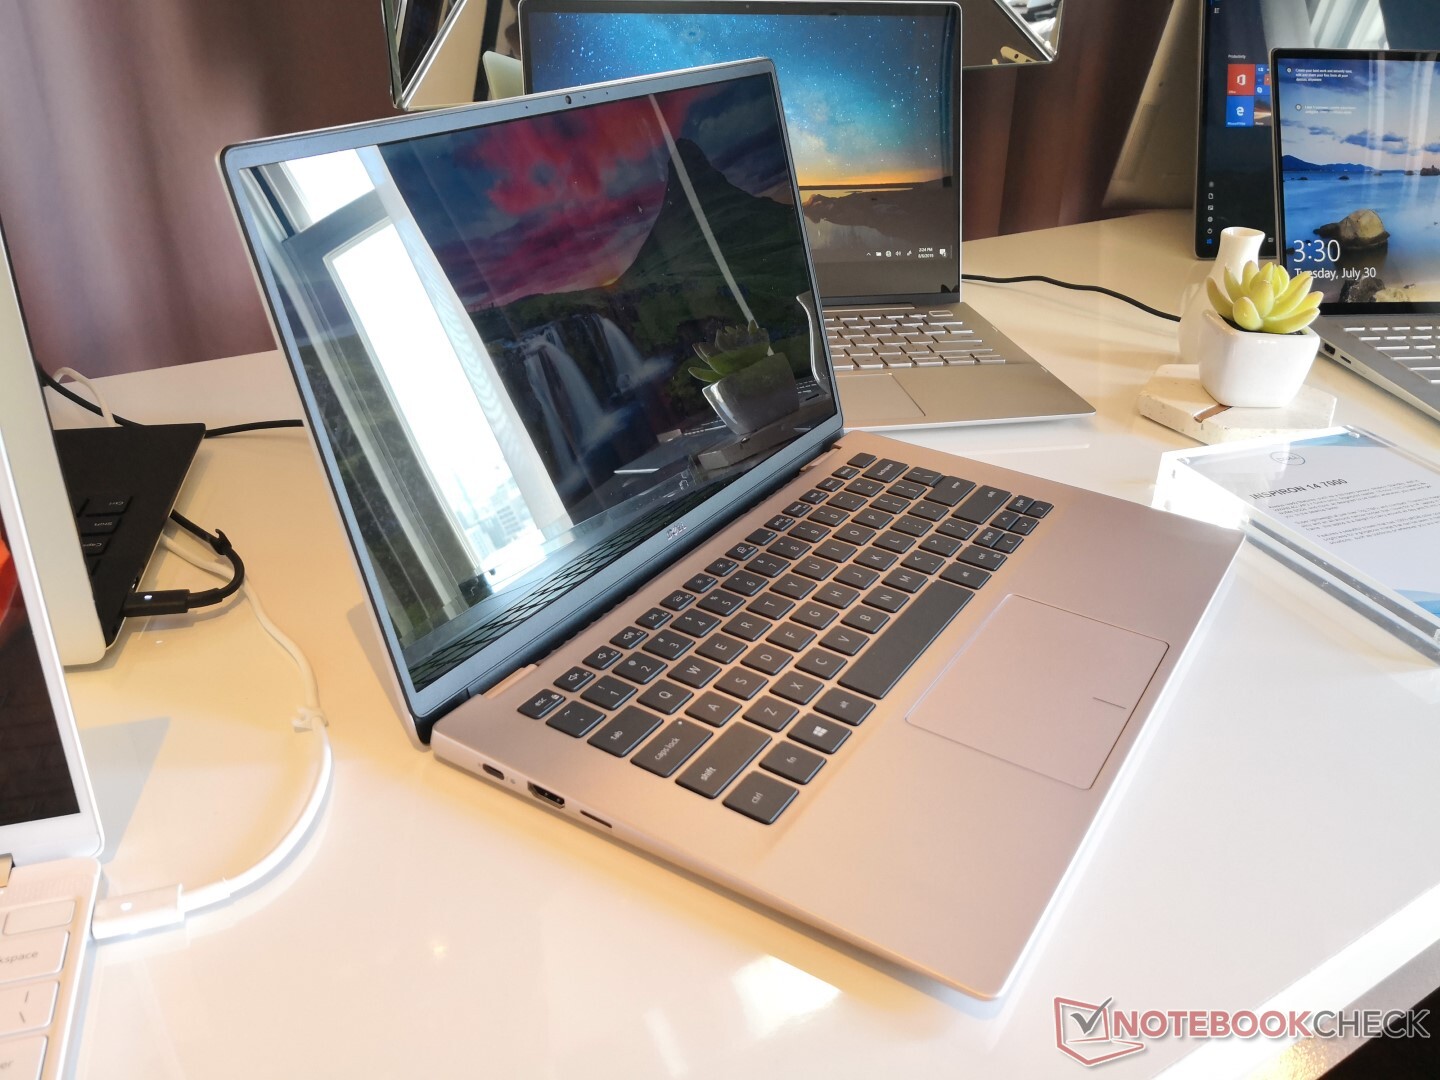 The Inspiron 14 7000 7490 Is Dell S Latest And Most Xps Like Laptop Yet In Both Looks And Features Notebookcheck Net News